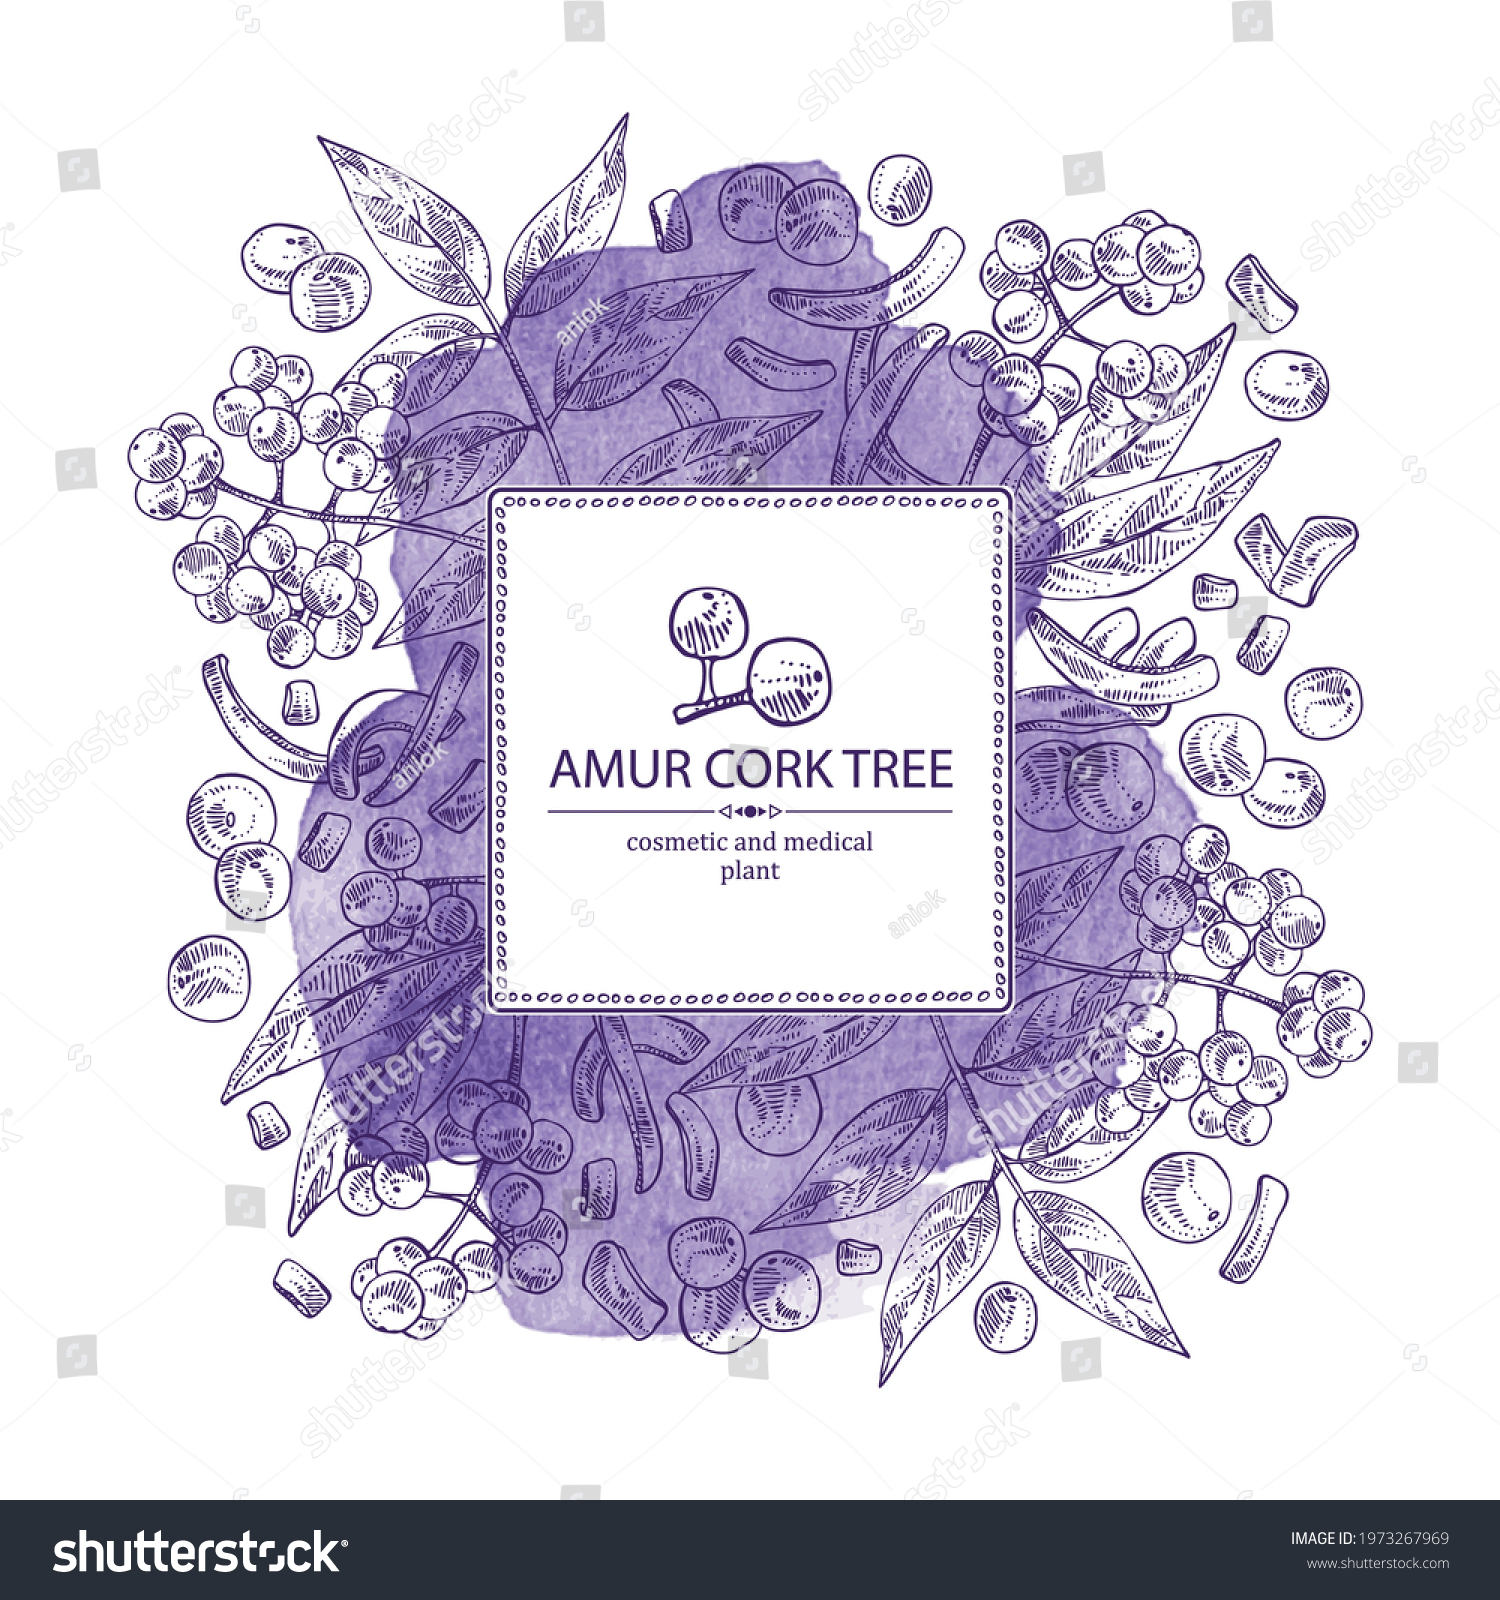 SVG of Watercolor background with amur cork tree: amur cork berries, plant and amur cork tree bark. Phellodendron amurense. Cosmetic and medical plant. Vector hand drawn illustration svg